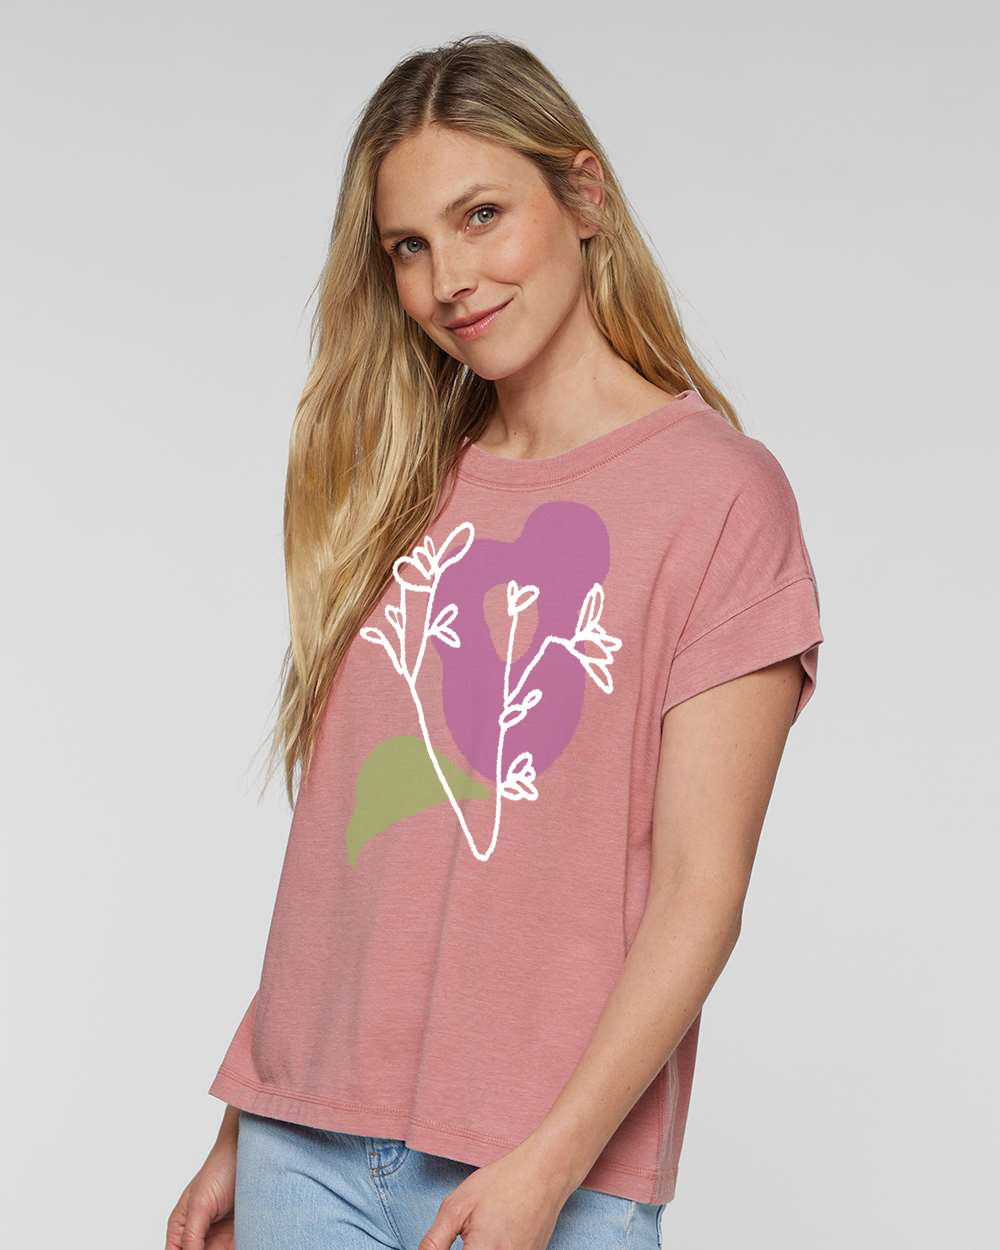 Abstract Floral : Women's Relaxed Vintage Wash Tee (Mauve)